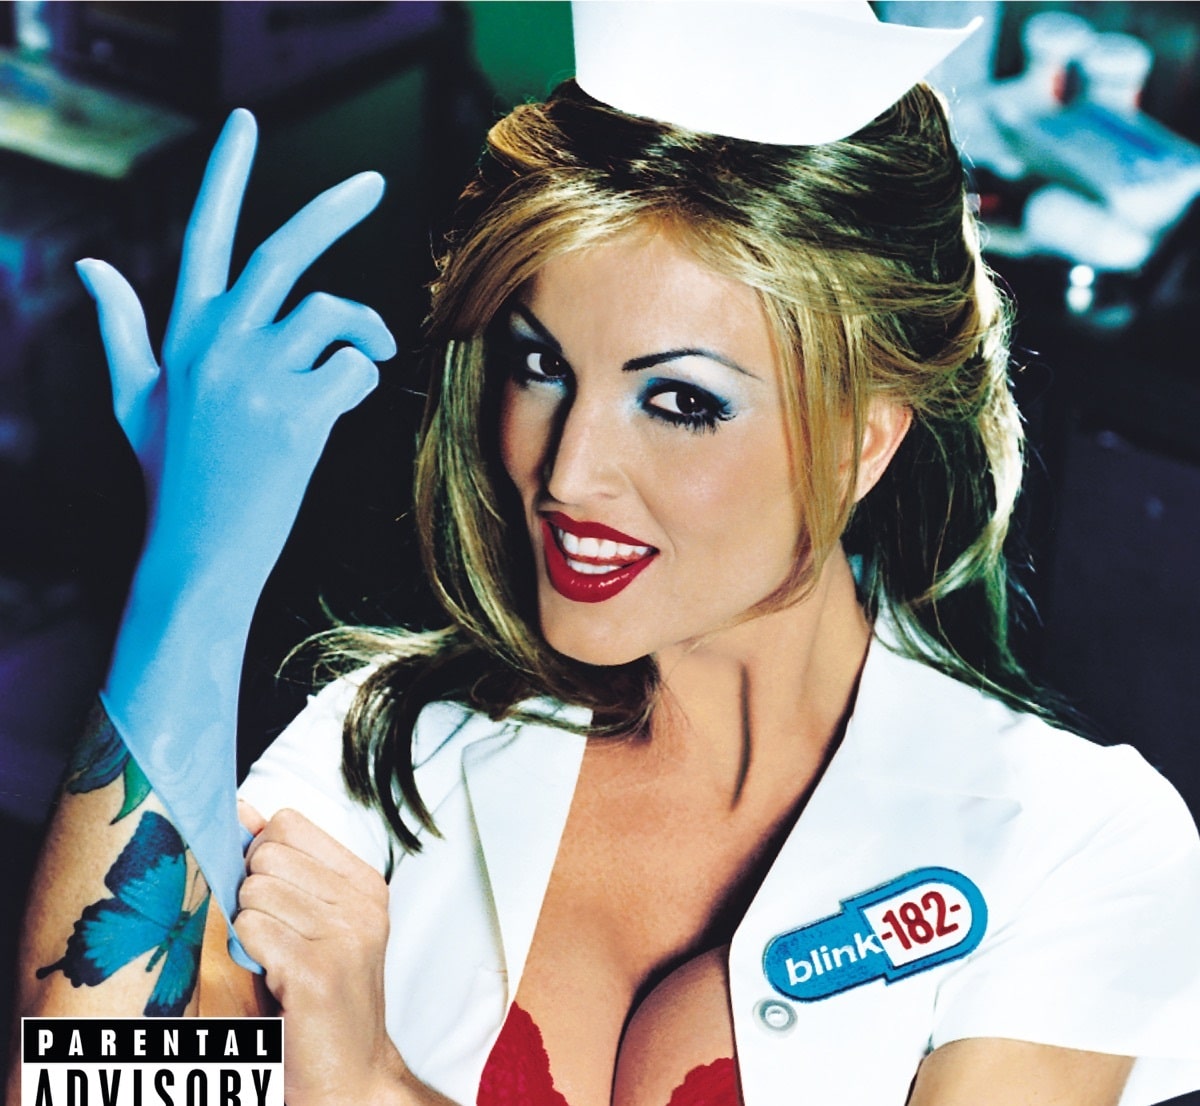 Blink-182 – Enema of the State